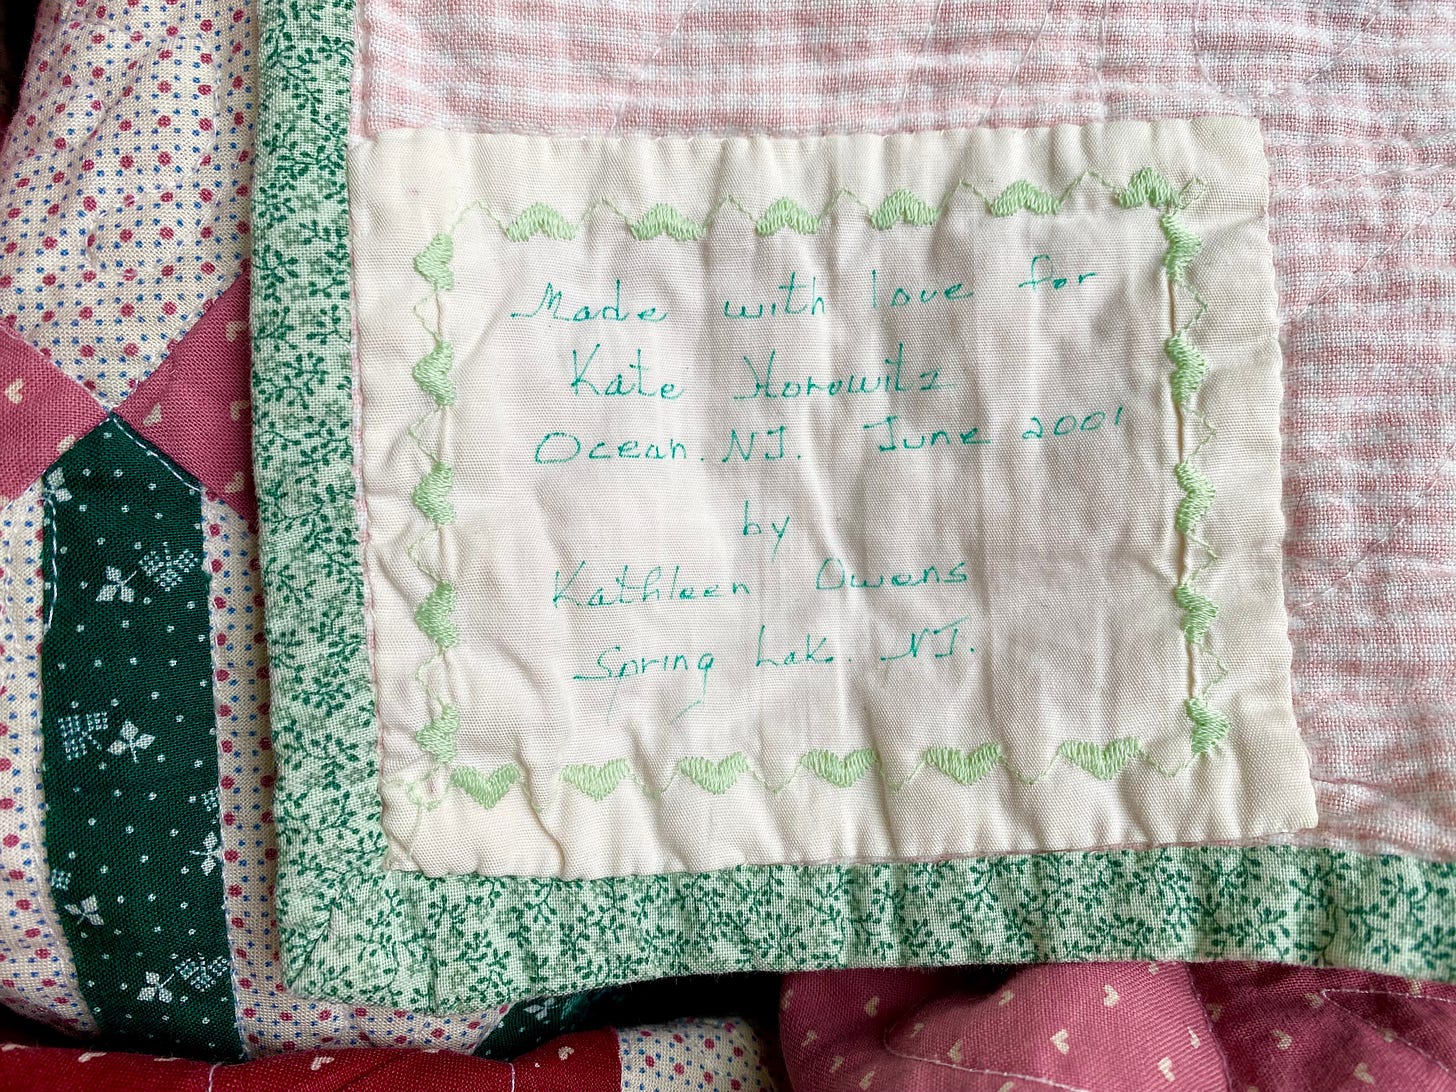 Closeup of a patchwork quilt. The handwritten label says "Made with love. Kate Horowitz, Ocean, NJ. June 2001. by Kathleen Owens, Spring Lake, NJ.